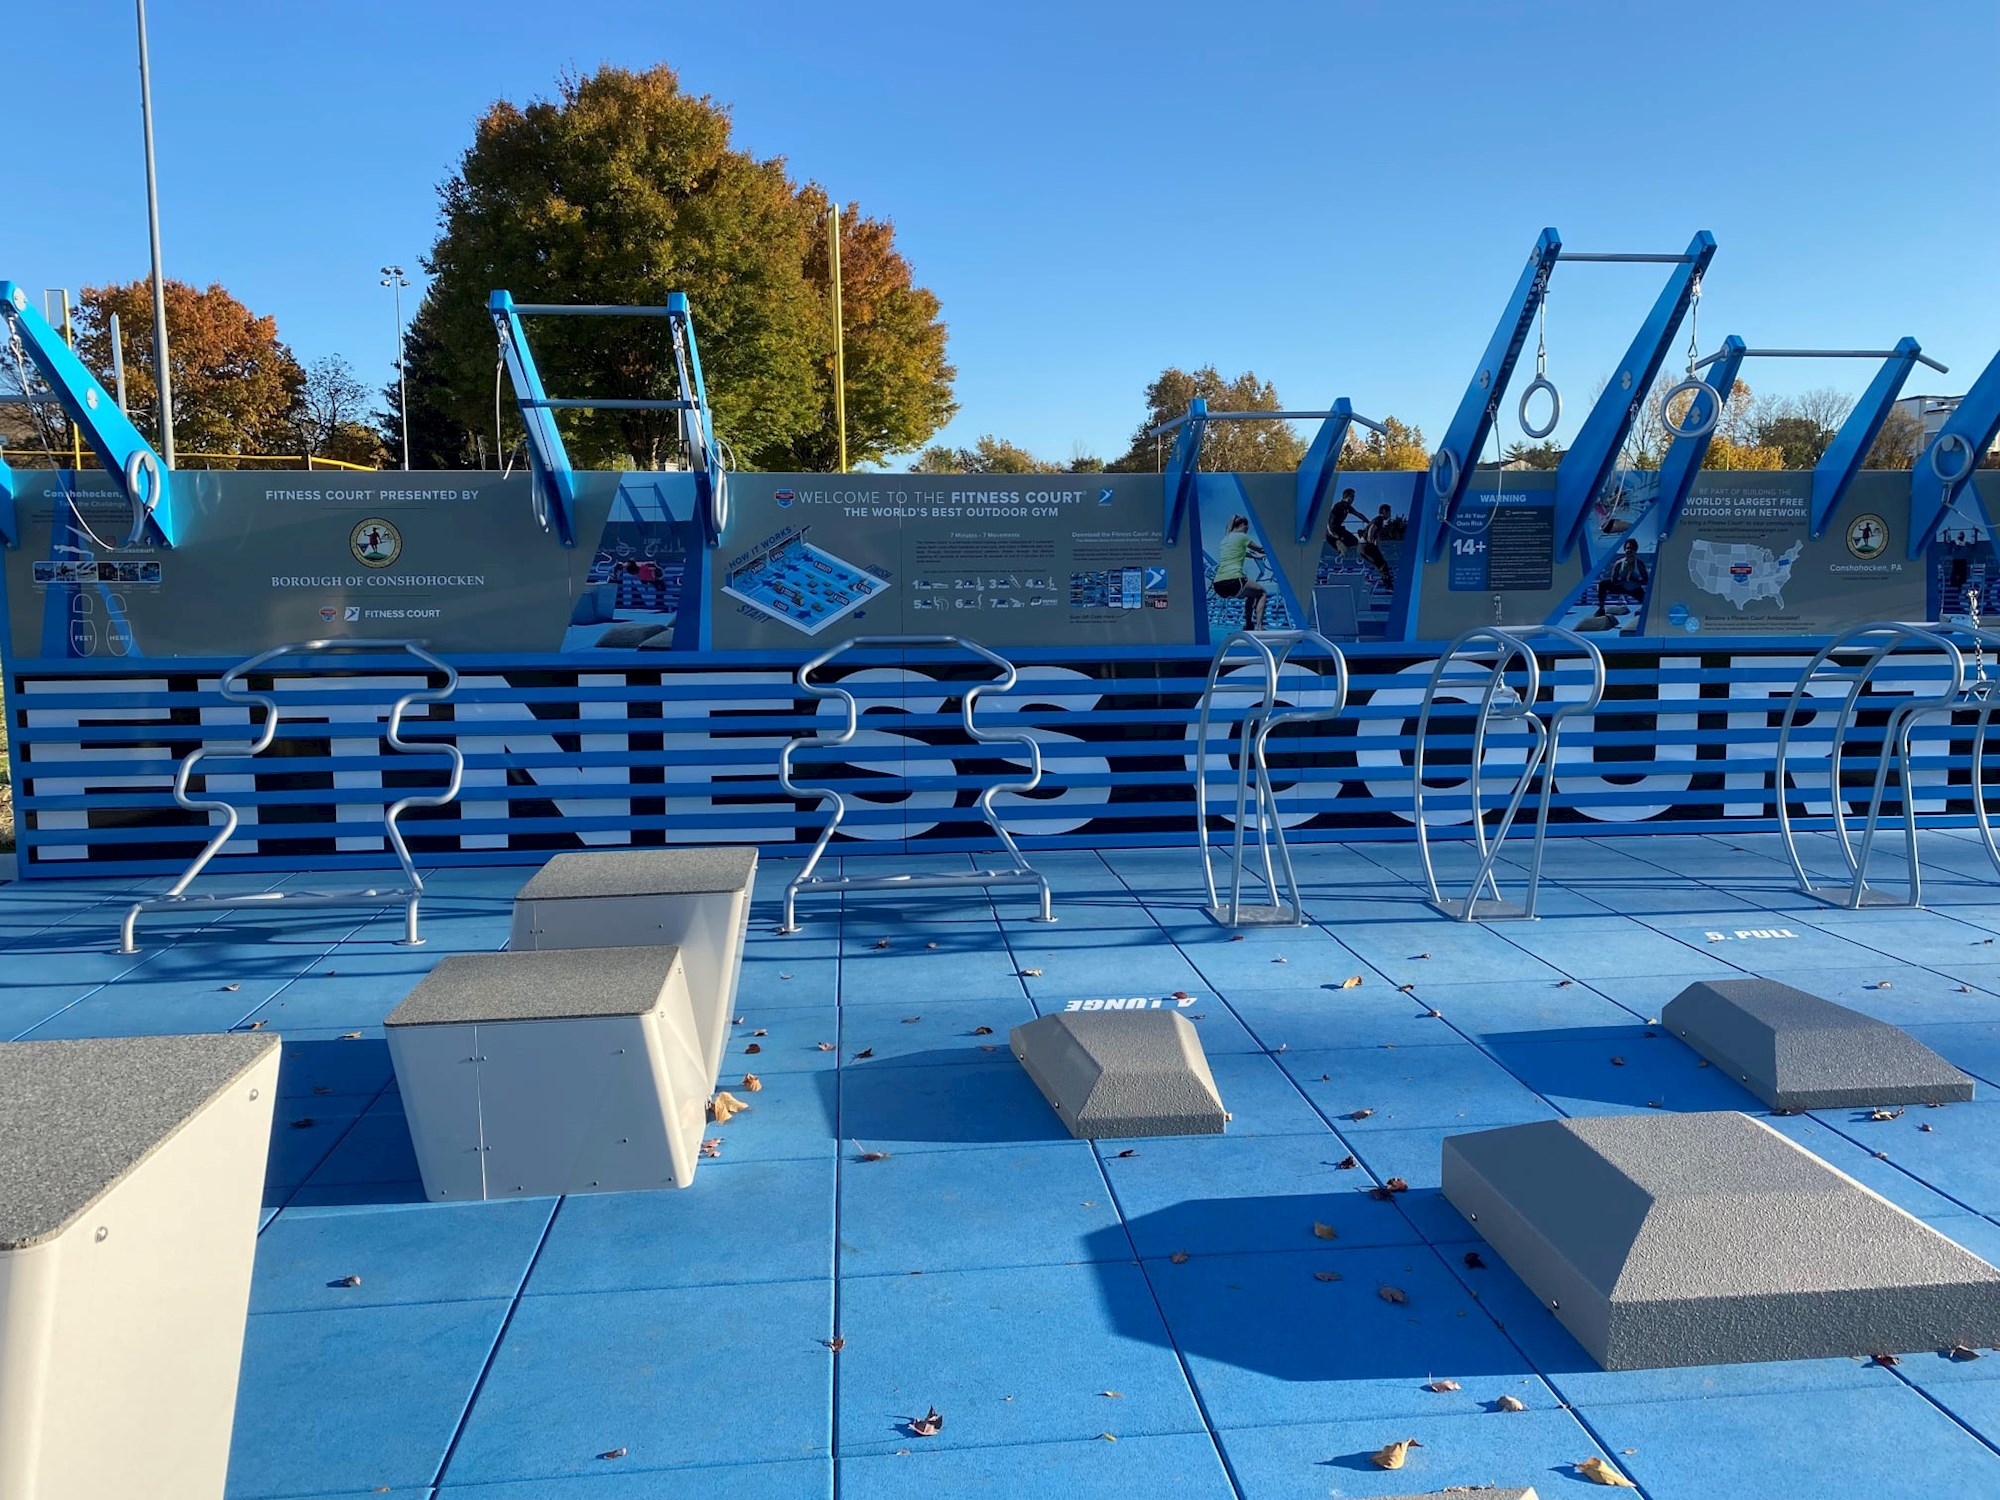 New Fitness Court Now Open At Sutcliffe